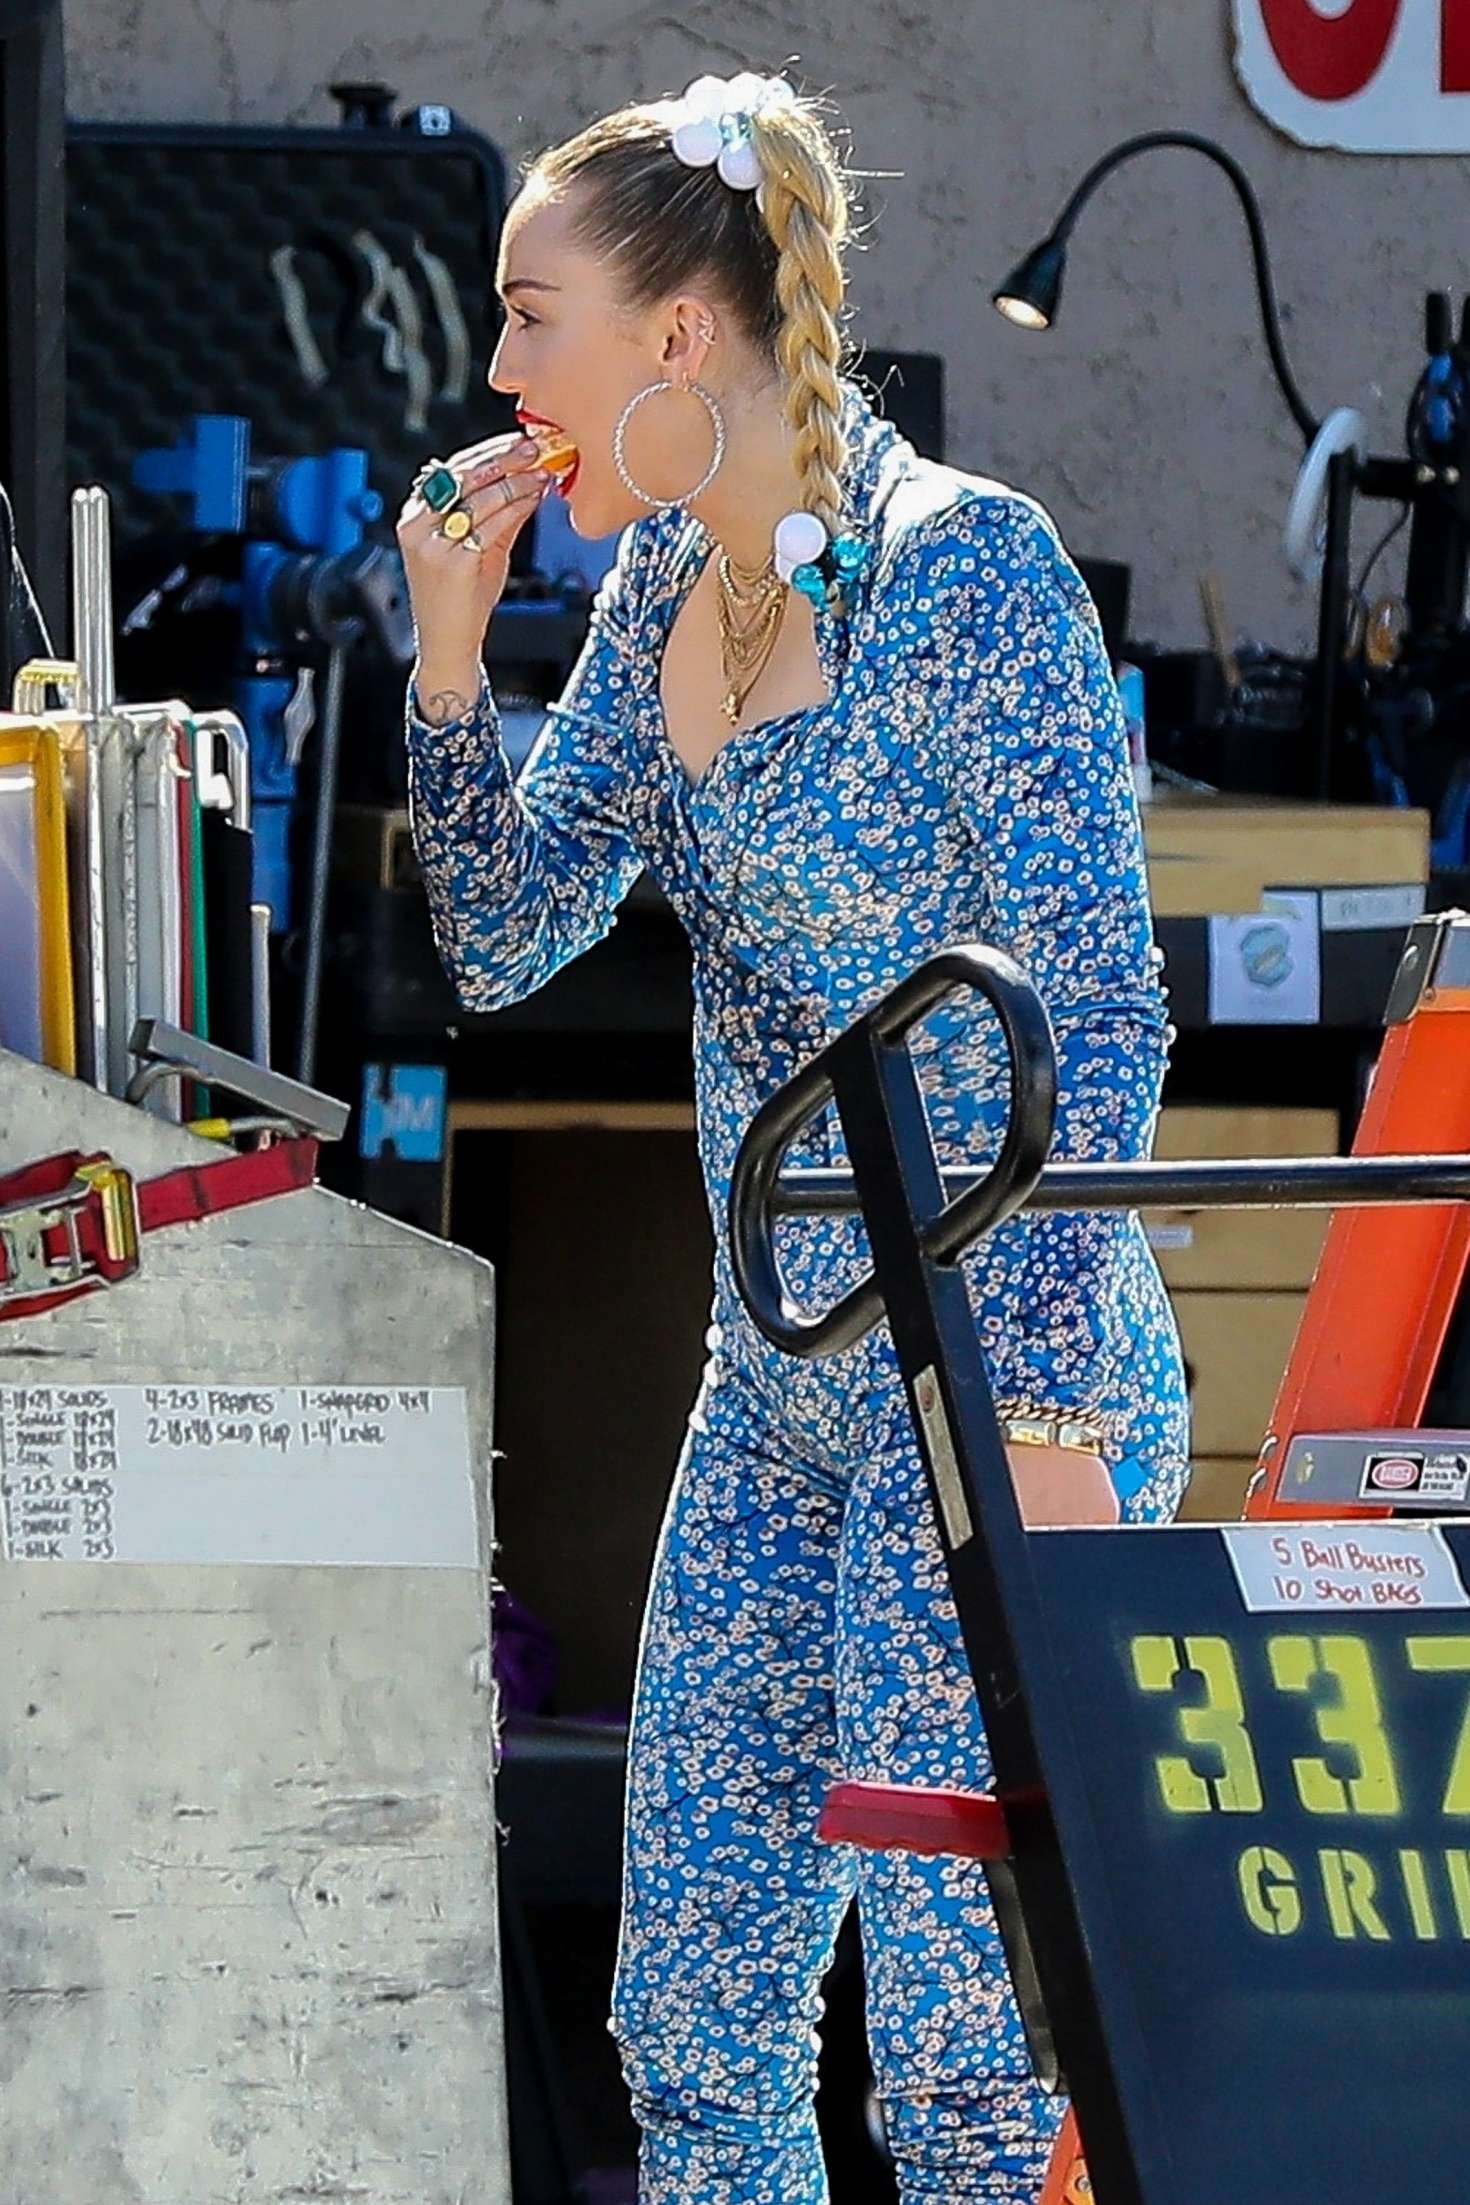 Miley Cyrus in Blue Floral Jumpsuit â€“ On set of her latest project in Los Angeles